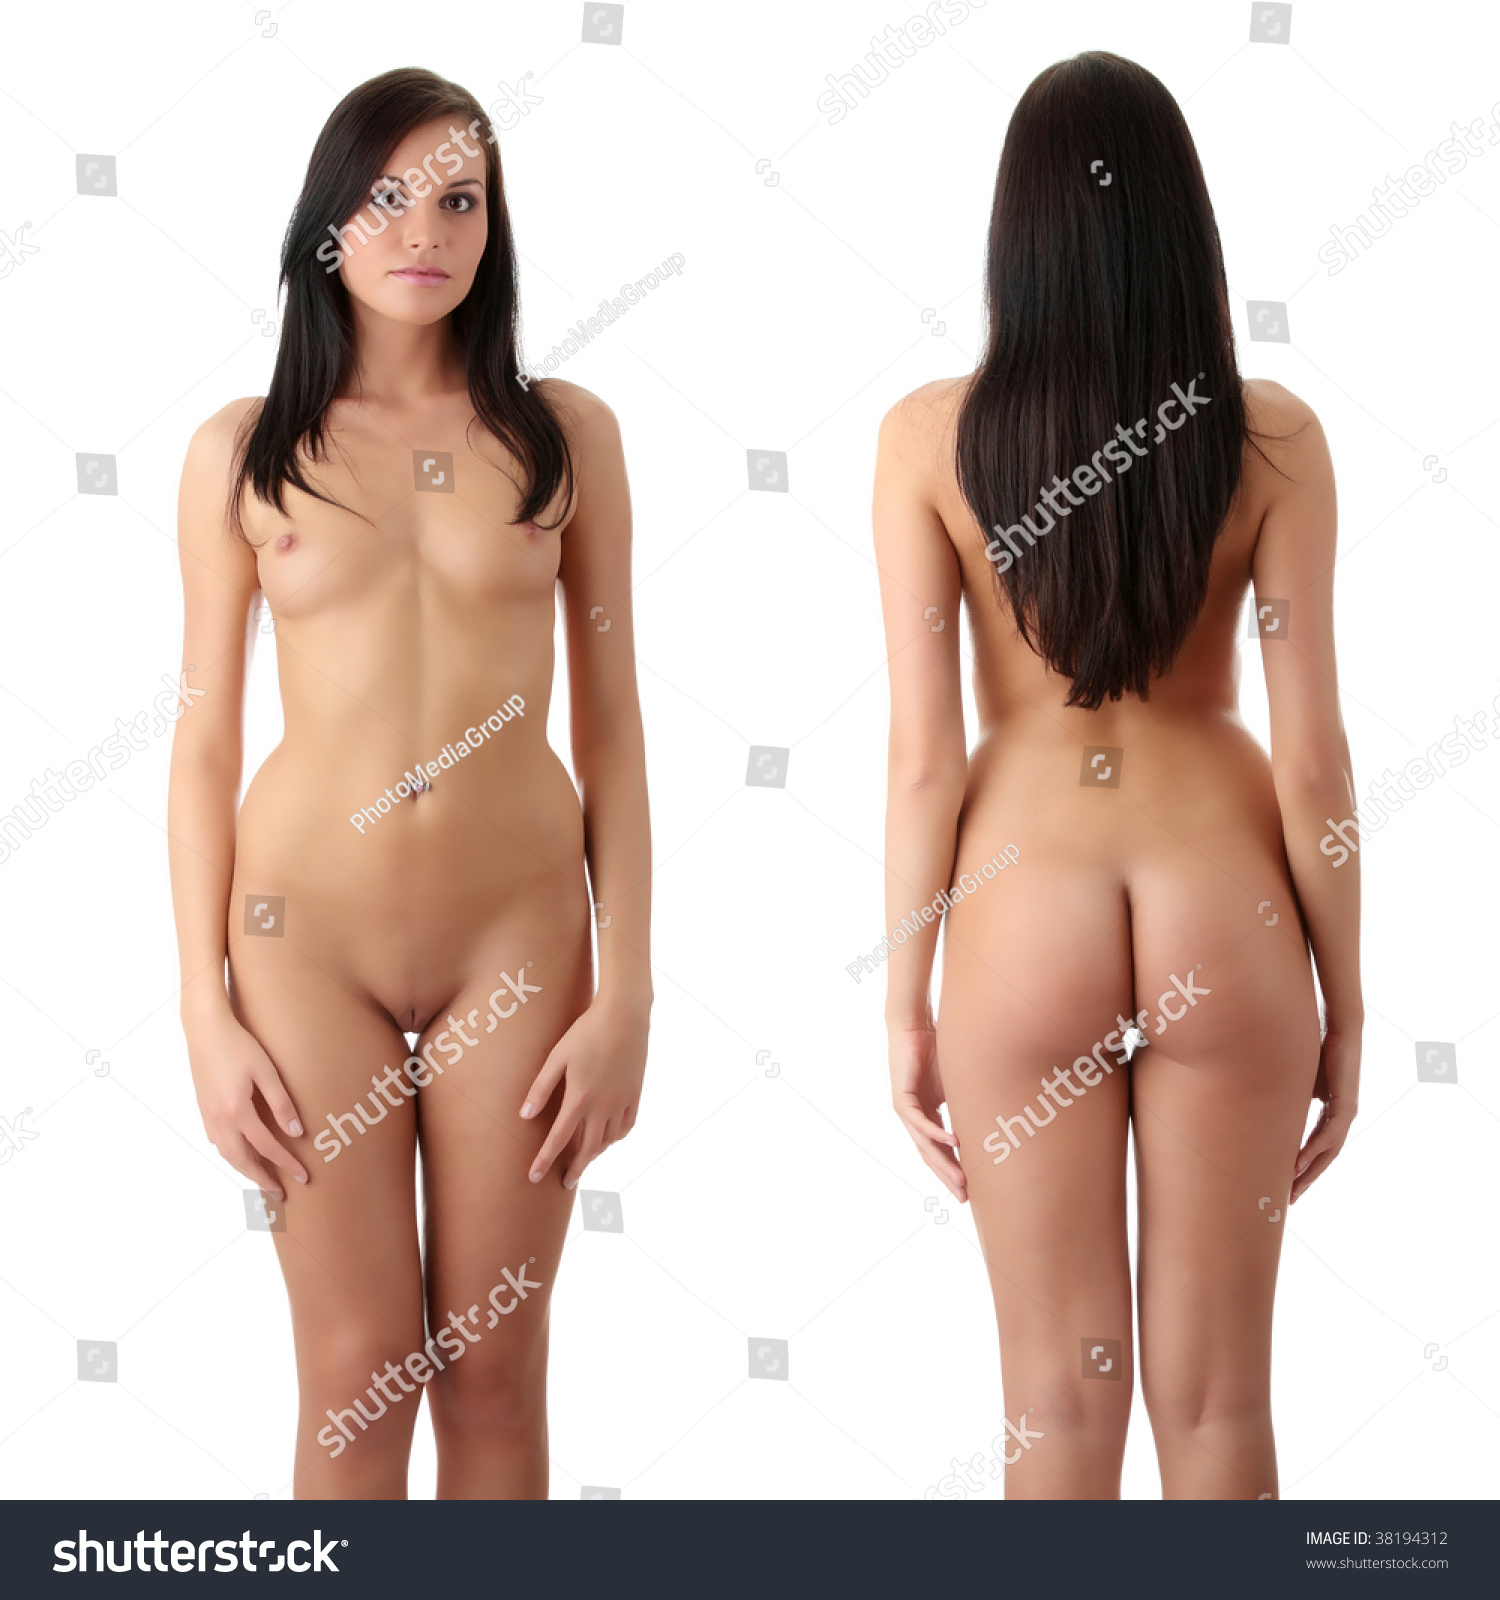 Porn Stock Images 8